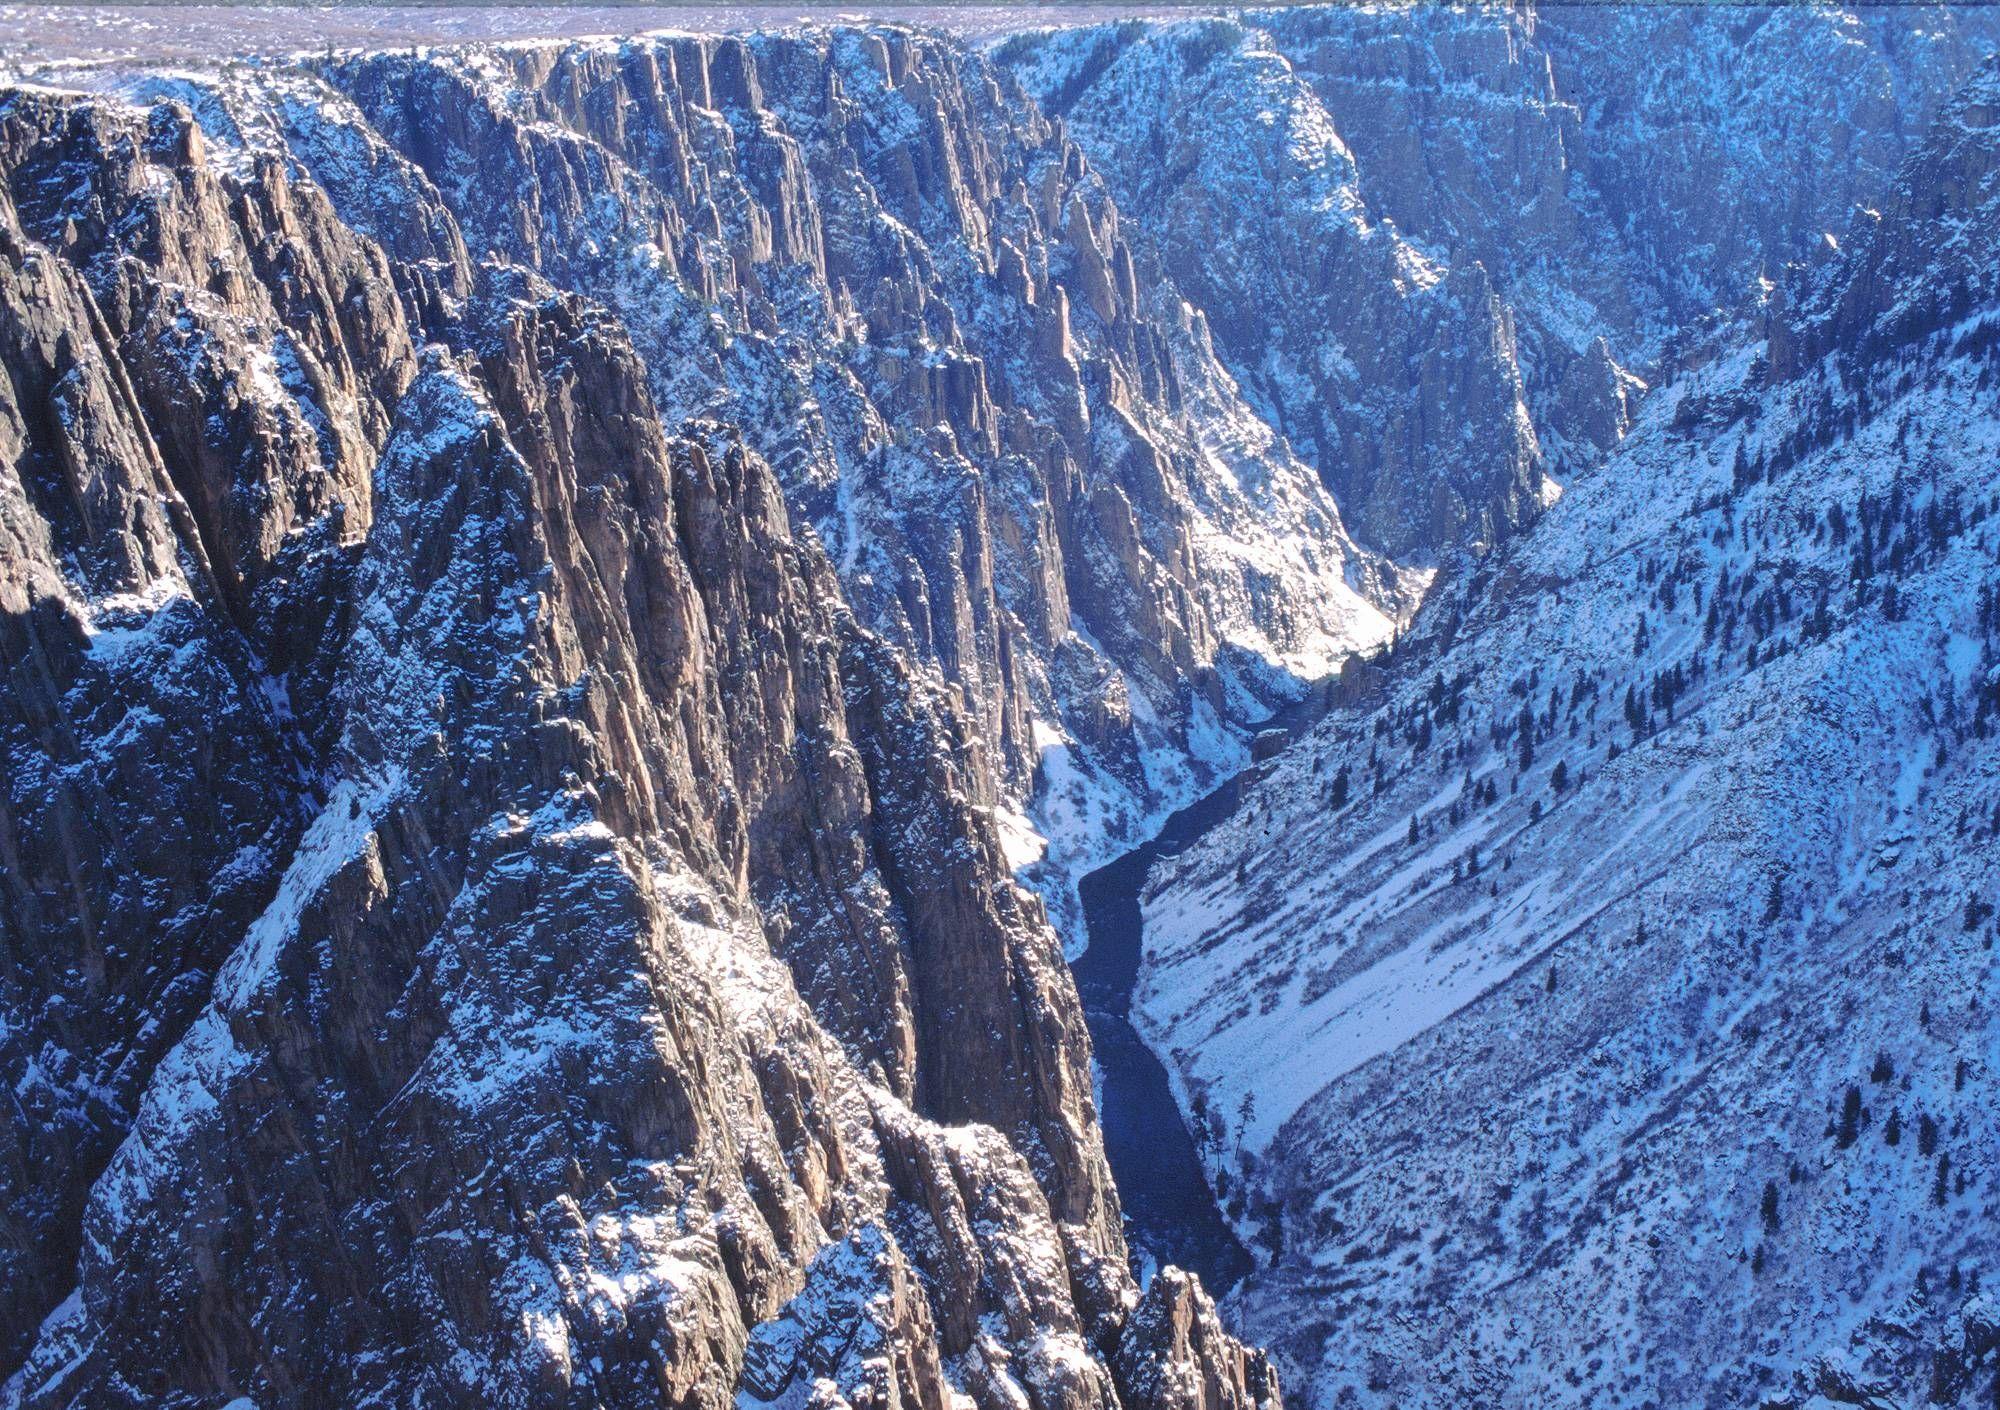 Black Canyon of The Gunnison By:Micah Wimmer